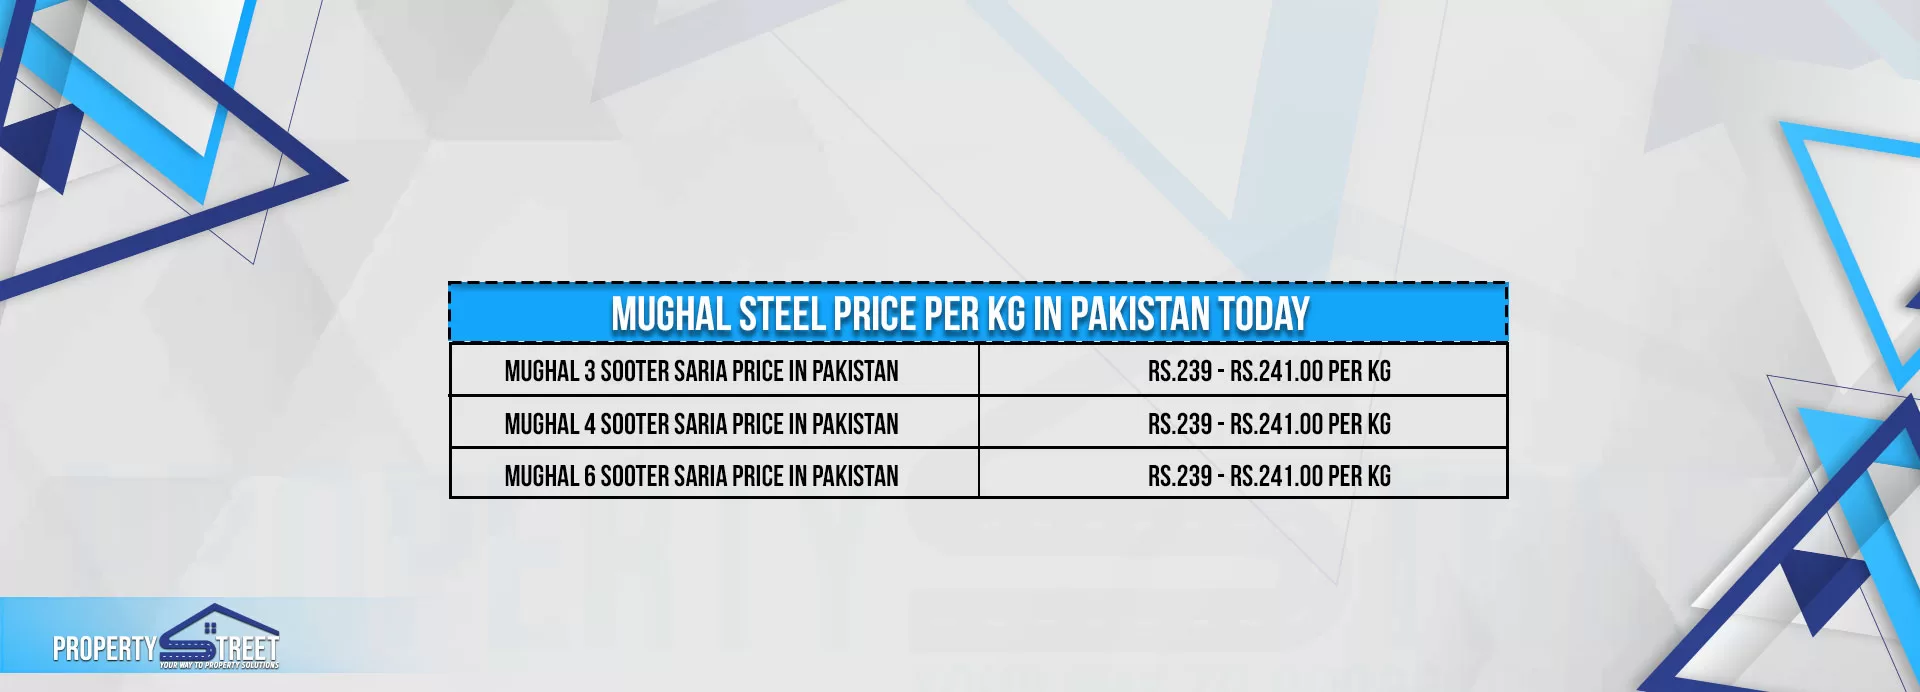 mughal steel price per kg today